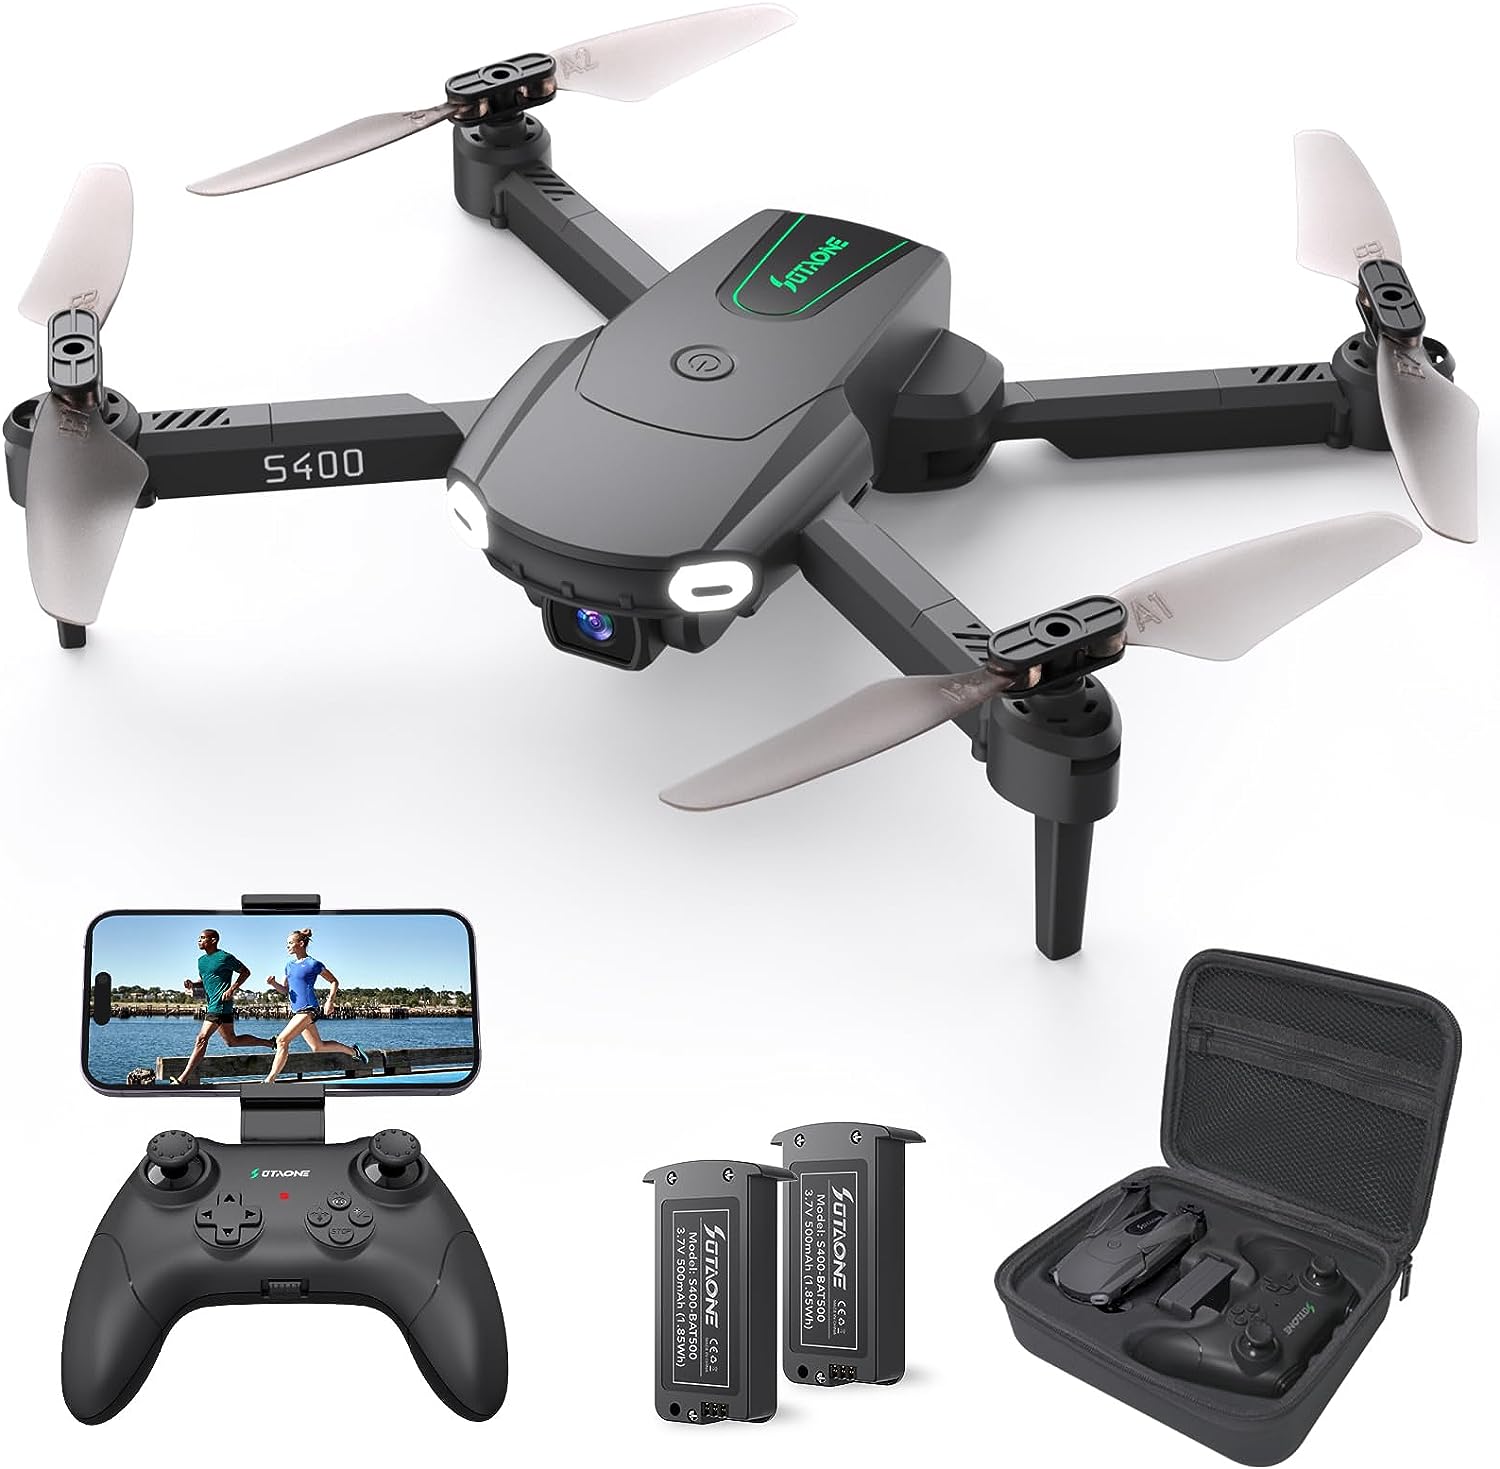 SOTAONE S400 Drone with Camera for Adults Kids, 1080P HD Foldable Mini Drones for Boys Girls, Remote Control Helicopter Toys Gifts with Auto-hovering, One Key Start, Self-spin, 3 Speeds, 2 Batteries